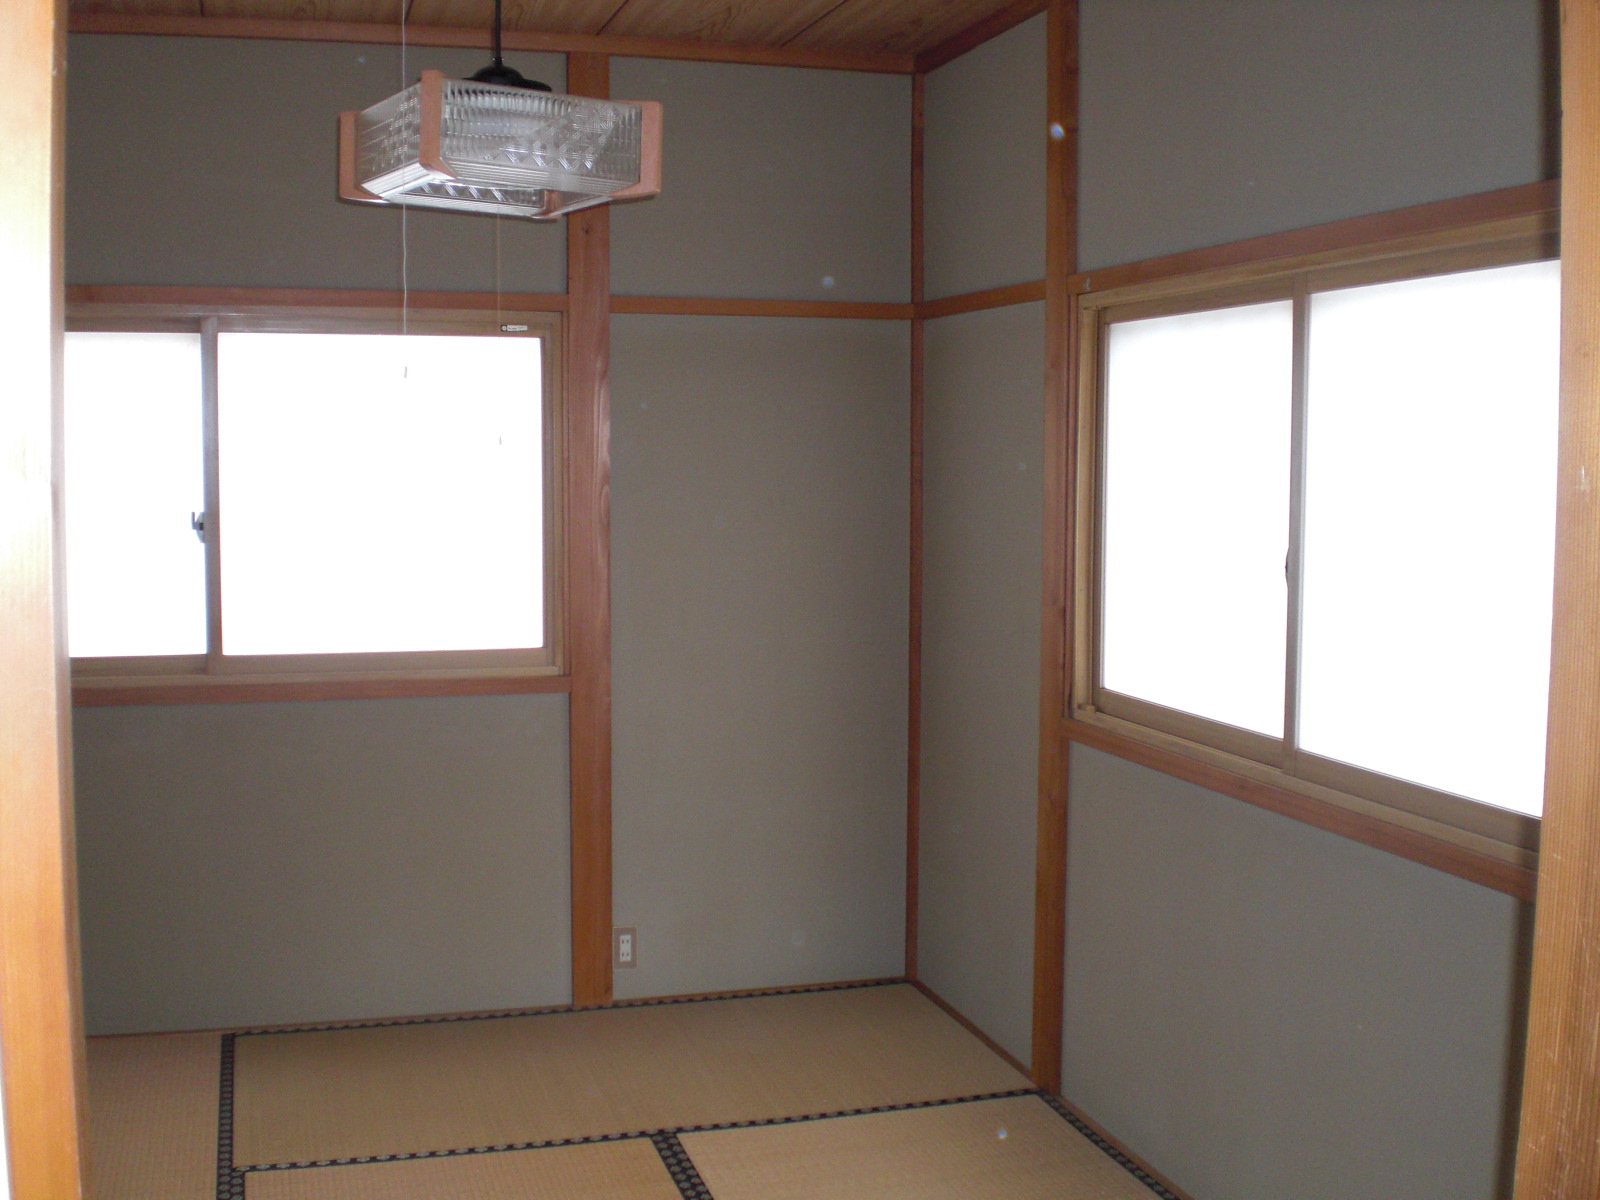 Other room space. There are east and north-facing window